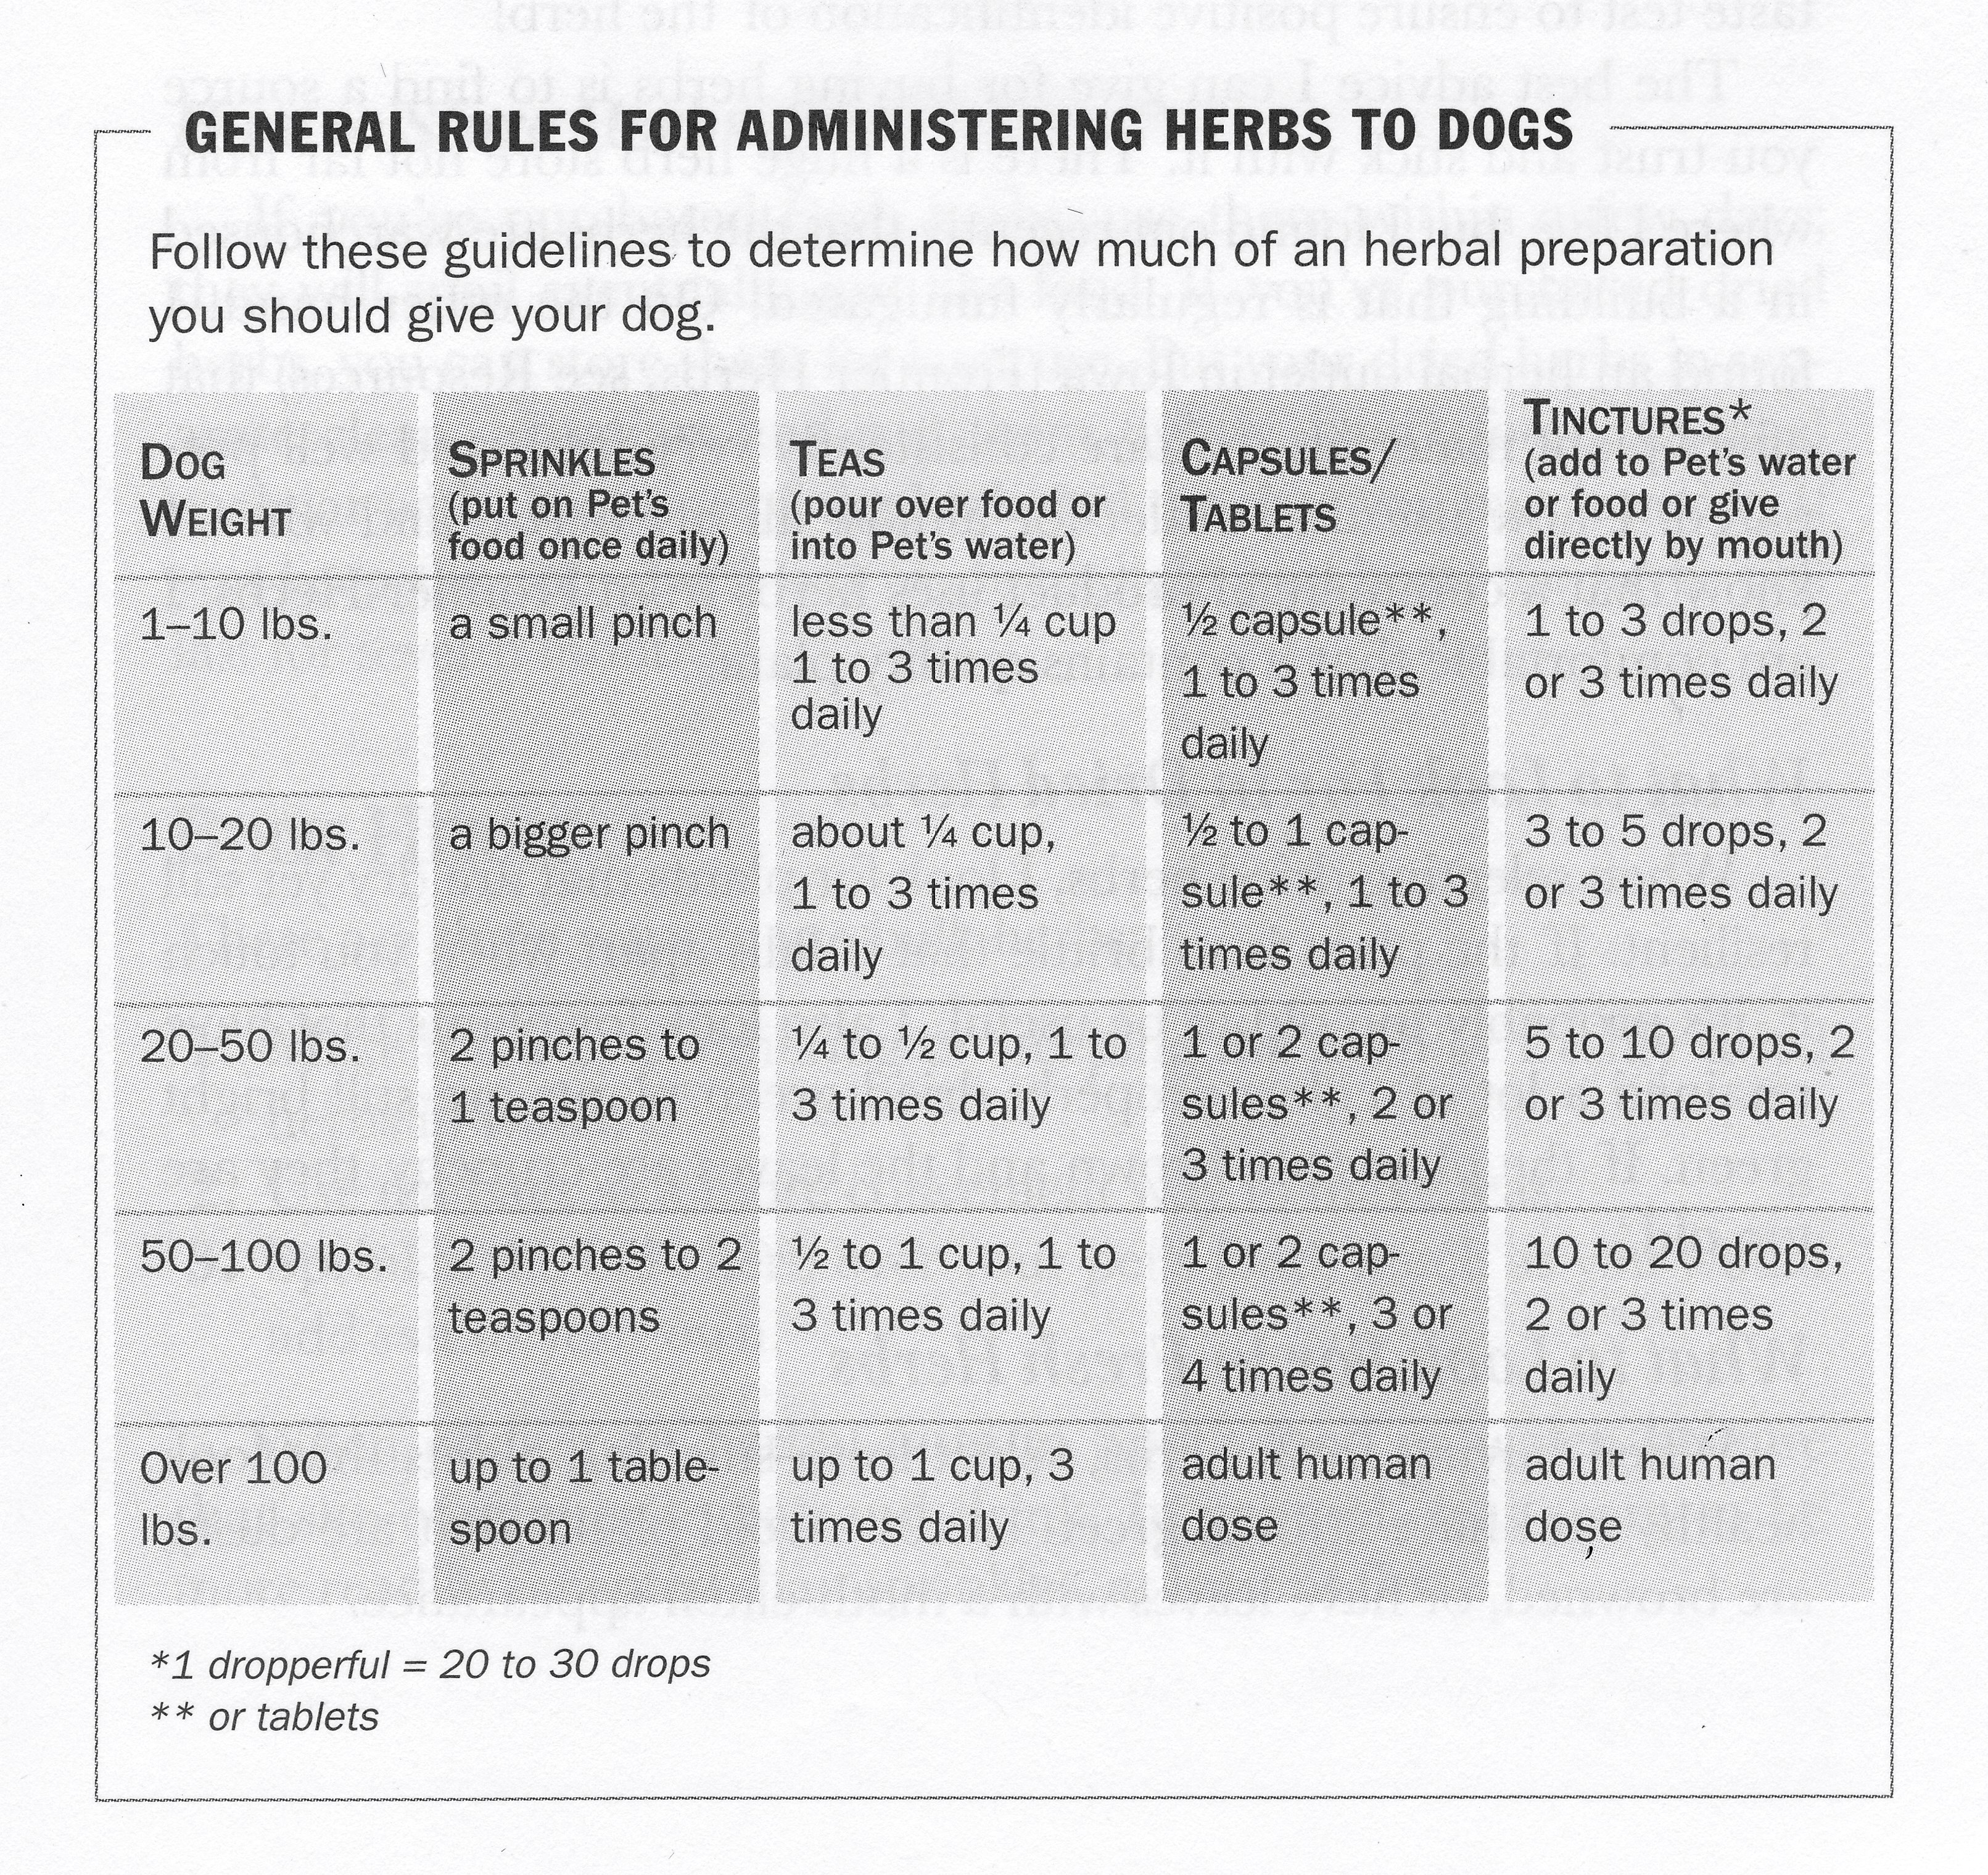 Herbs for Dogs - Chart